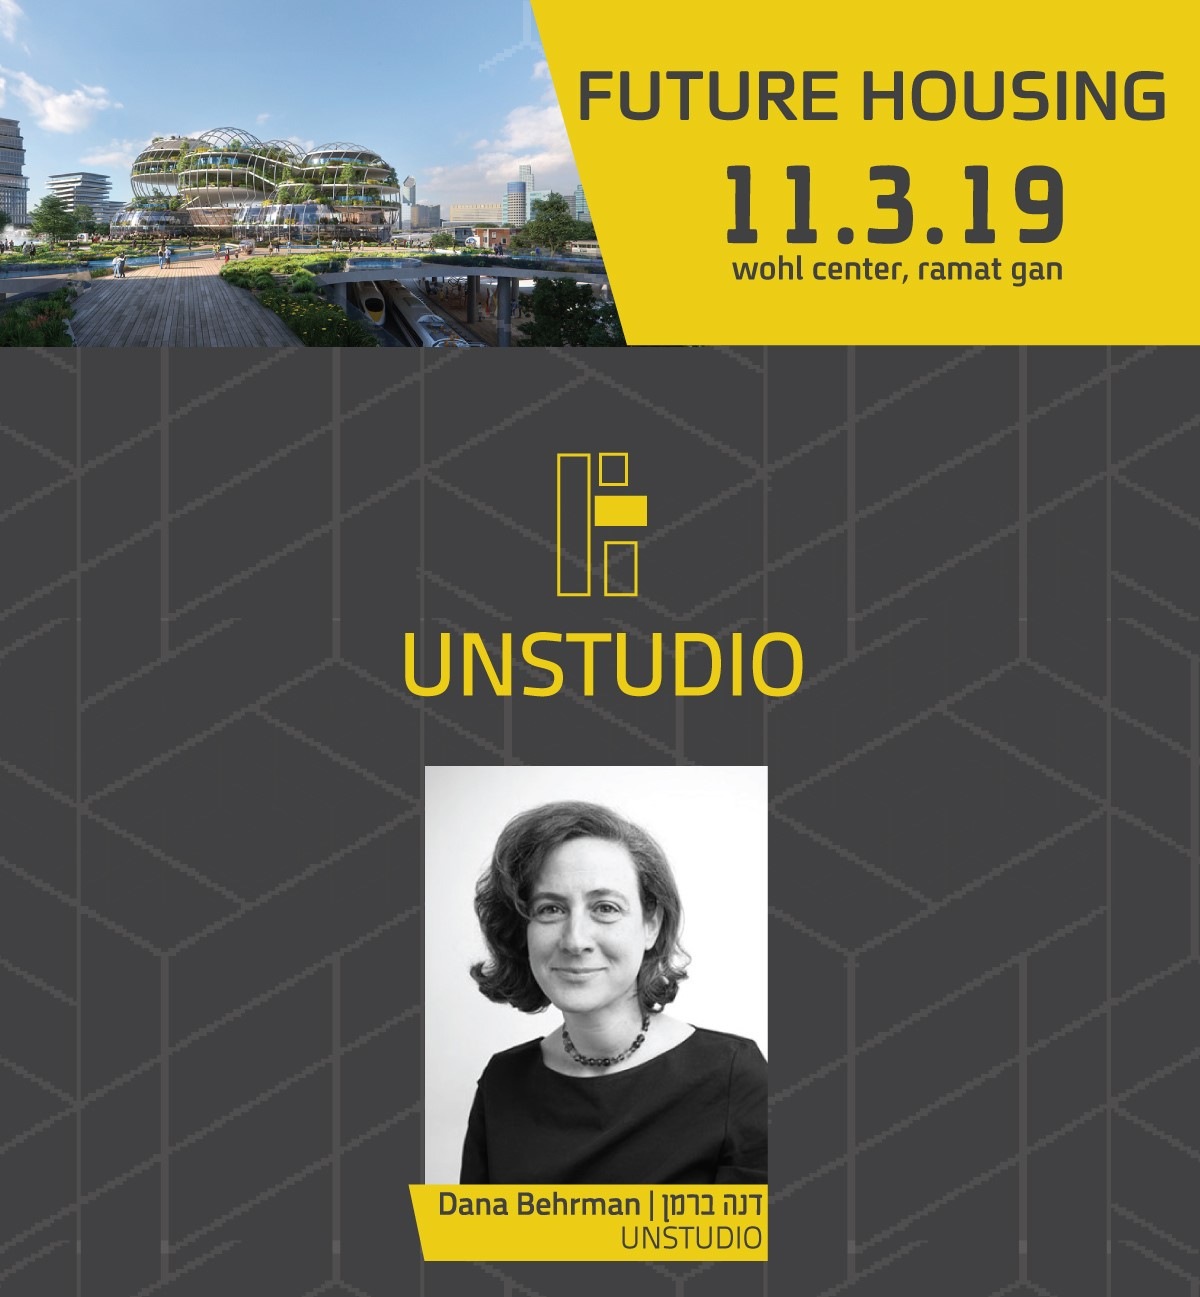 SOLD OUT: Dana Behrman Keynote at Next Generation Housing Conference